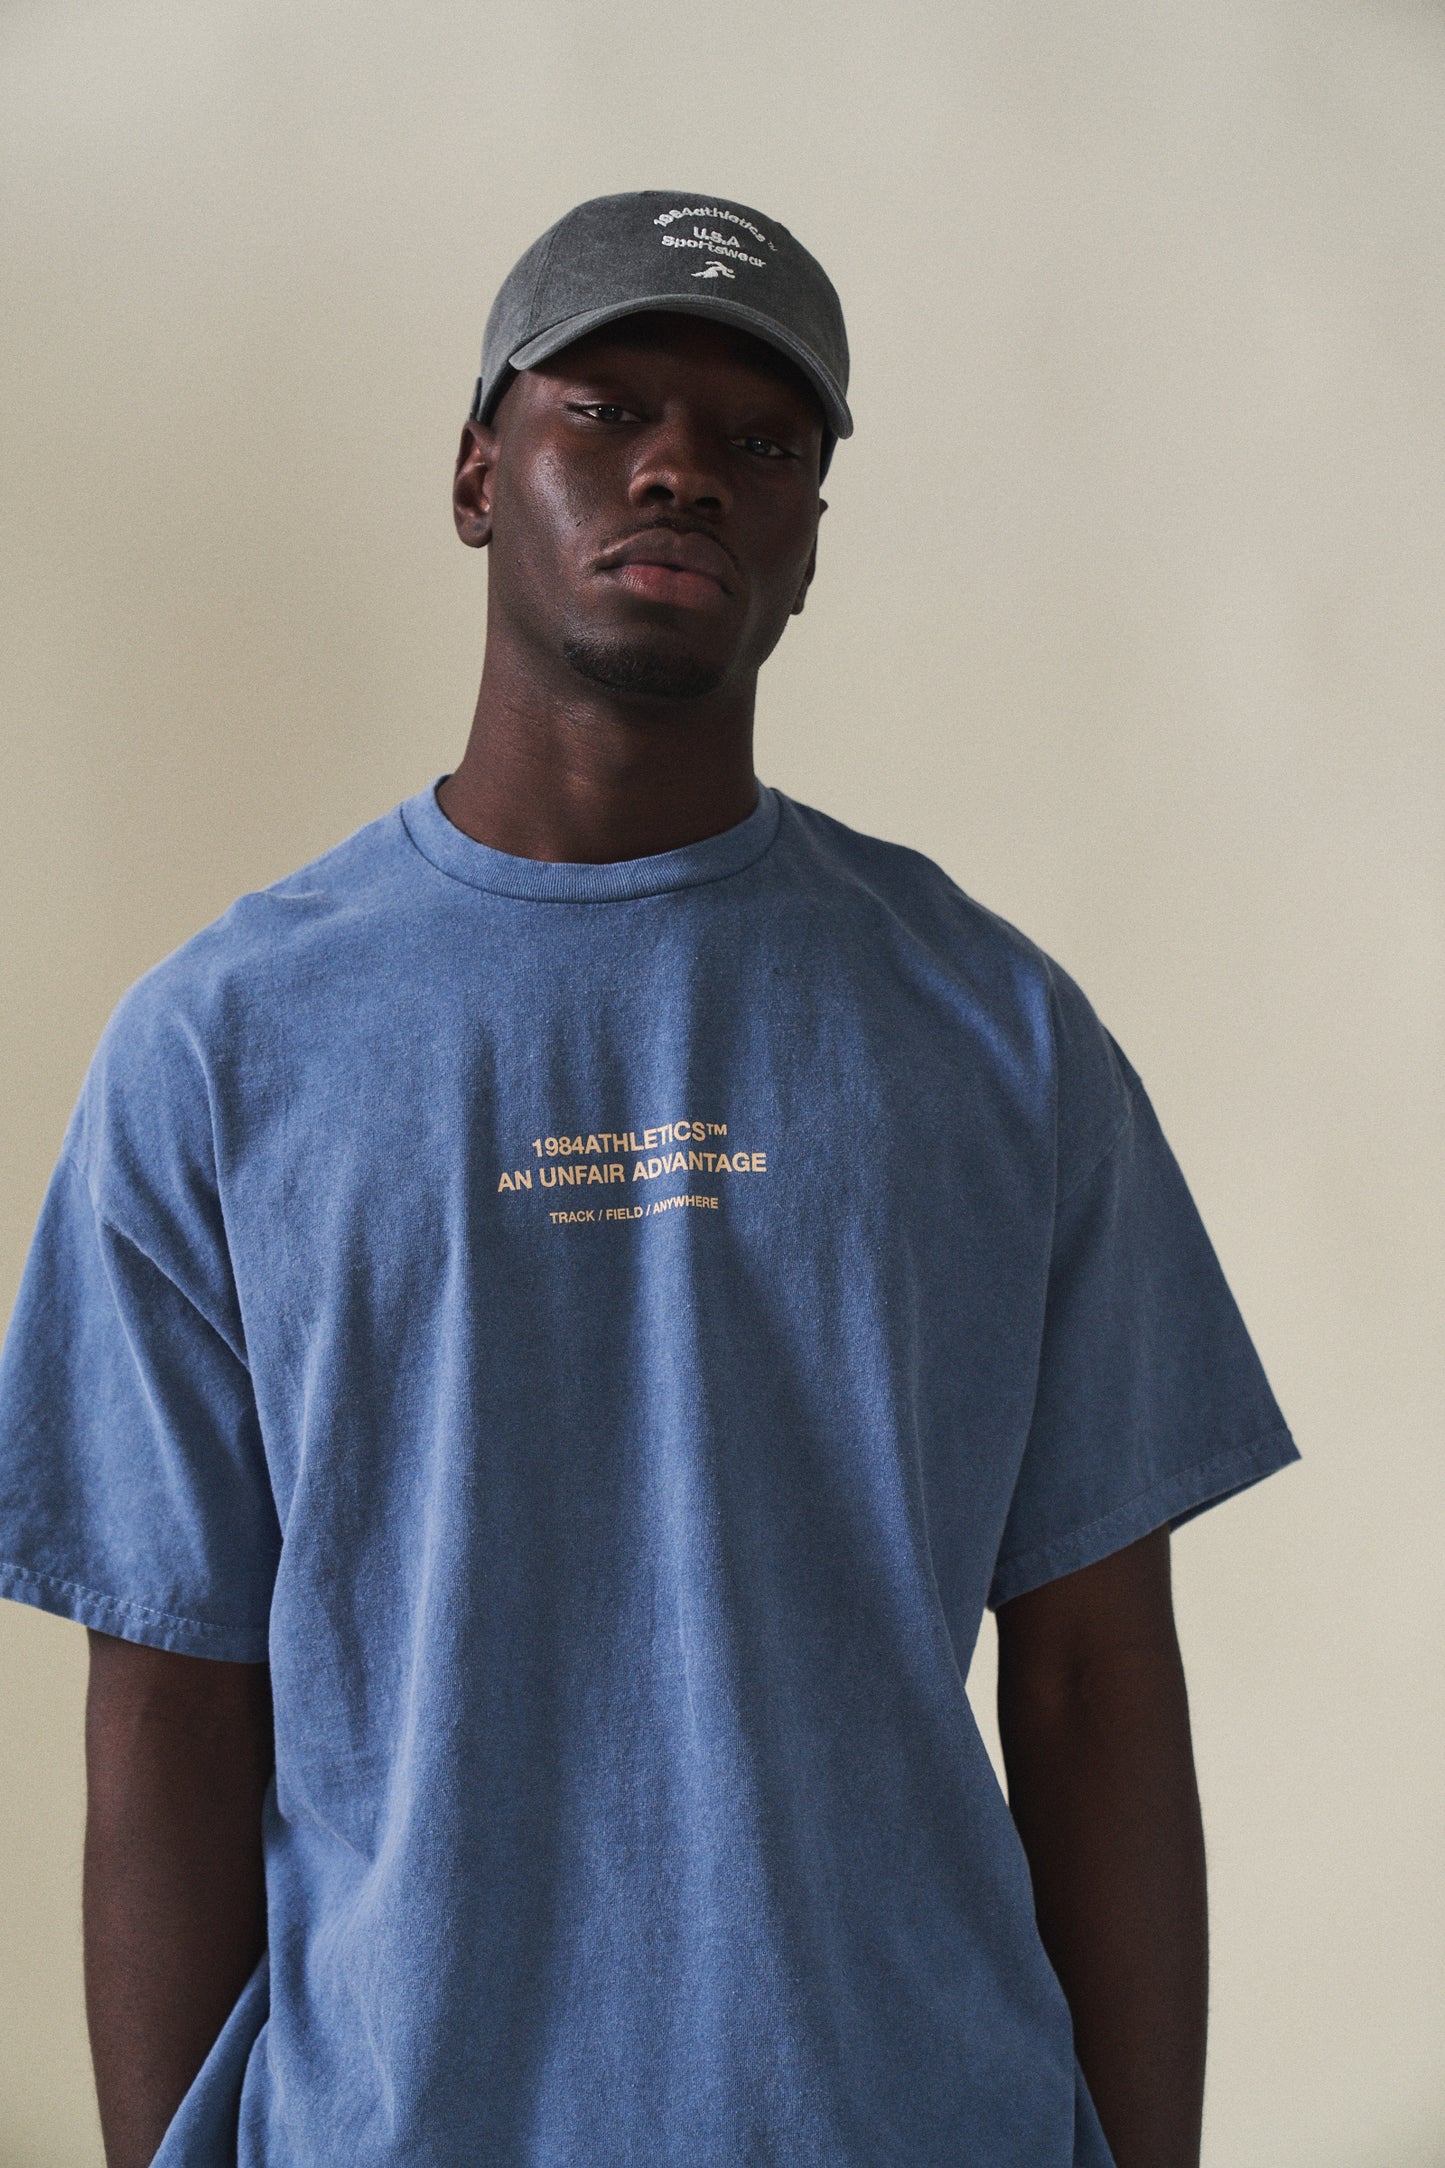 Vice 84 'Athletics' Vintage Washed Tee - Pacific Blue – UN:IK Clothing